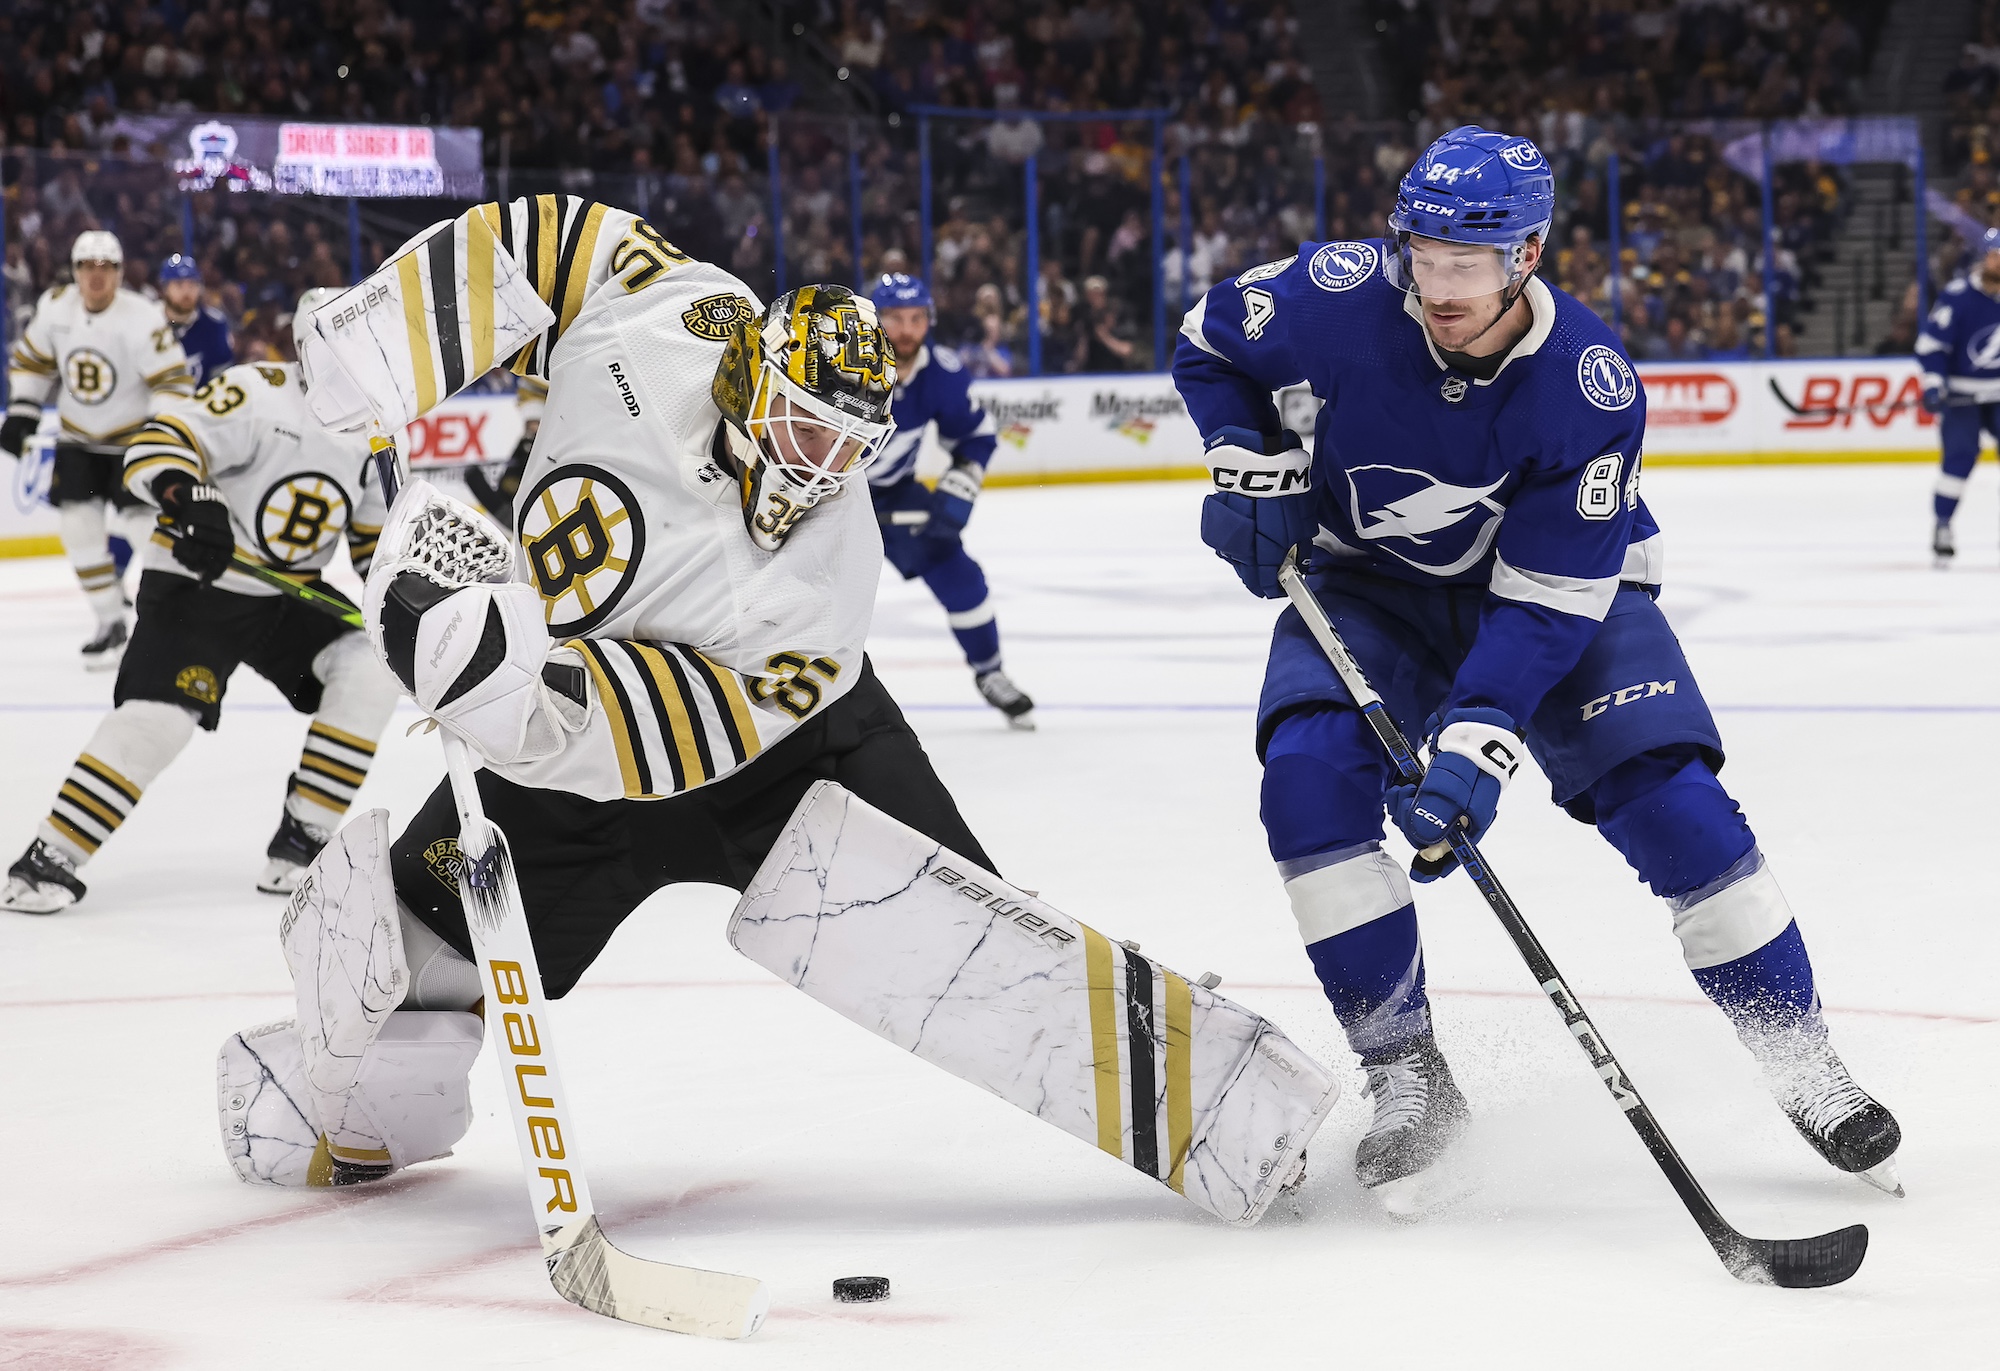 TAMPA, FL - MARCH 27: Tanner Jeannot #84 of the Tampa Bay Lightning battles for the puck against goalie Linus Ullmark #35 of the Boston Bruins during the third period at Amalie Arena on March 27, 2024 in Tampa, Florida. (Photo by Mark LoMoglio/NHLI via Getty Images)